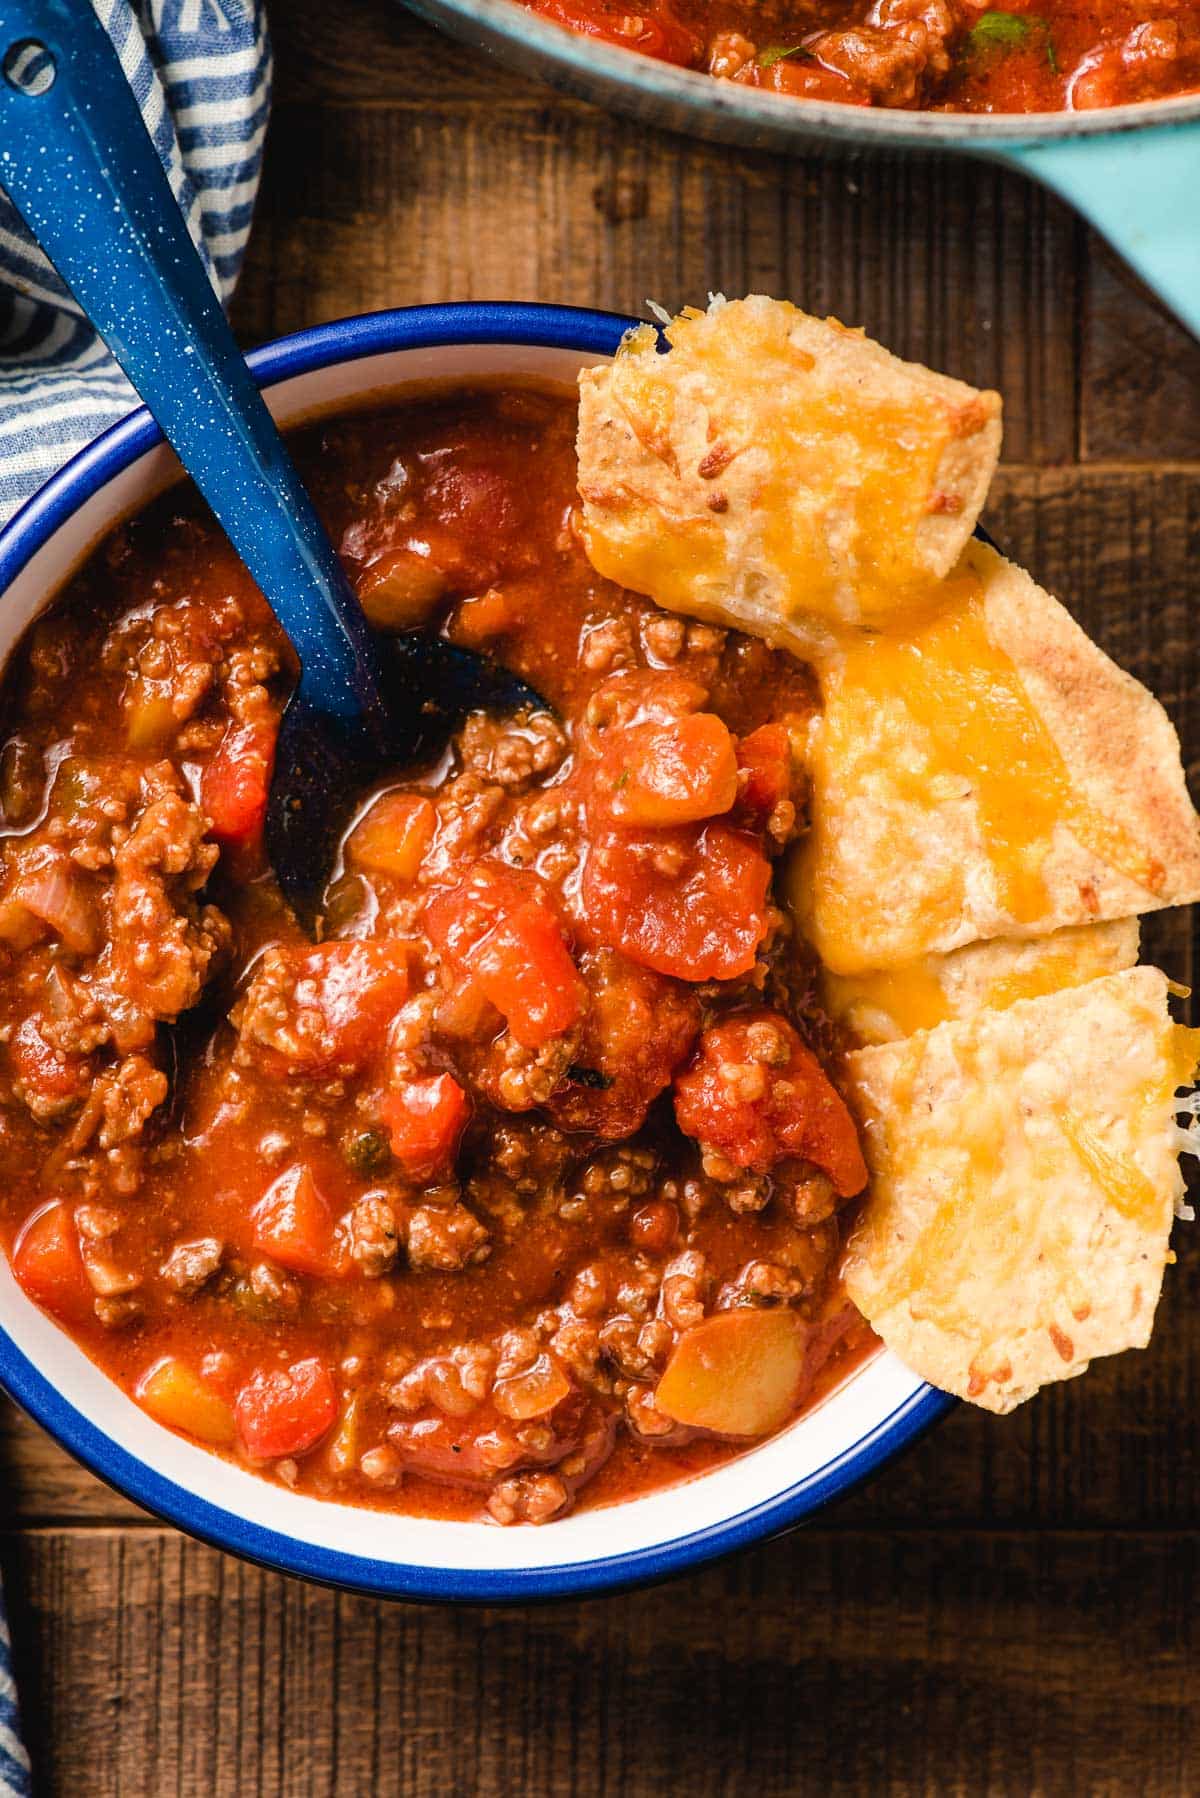 A bowl of Italian Sausage Chili with cheesy chips.